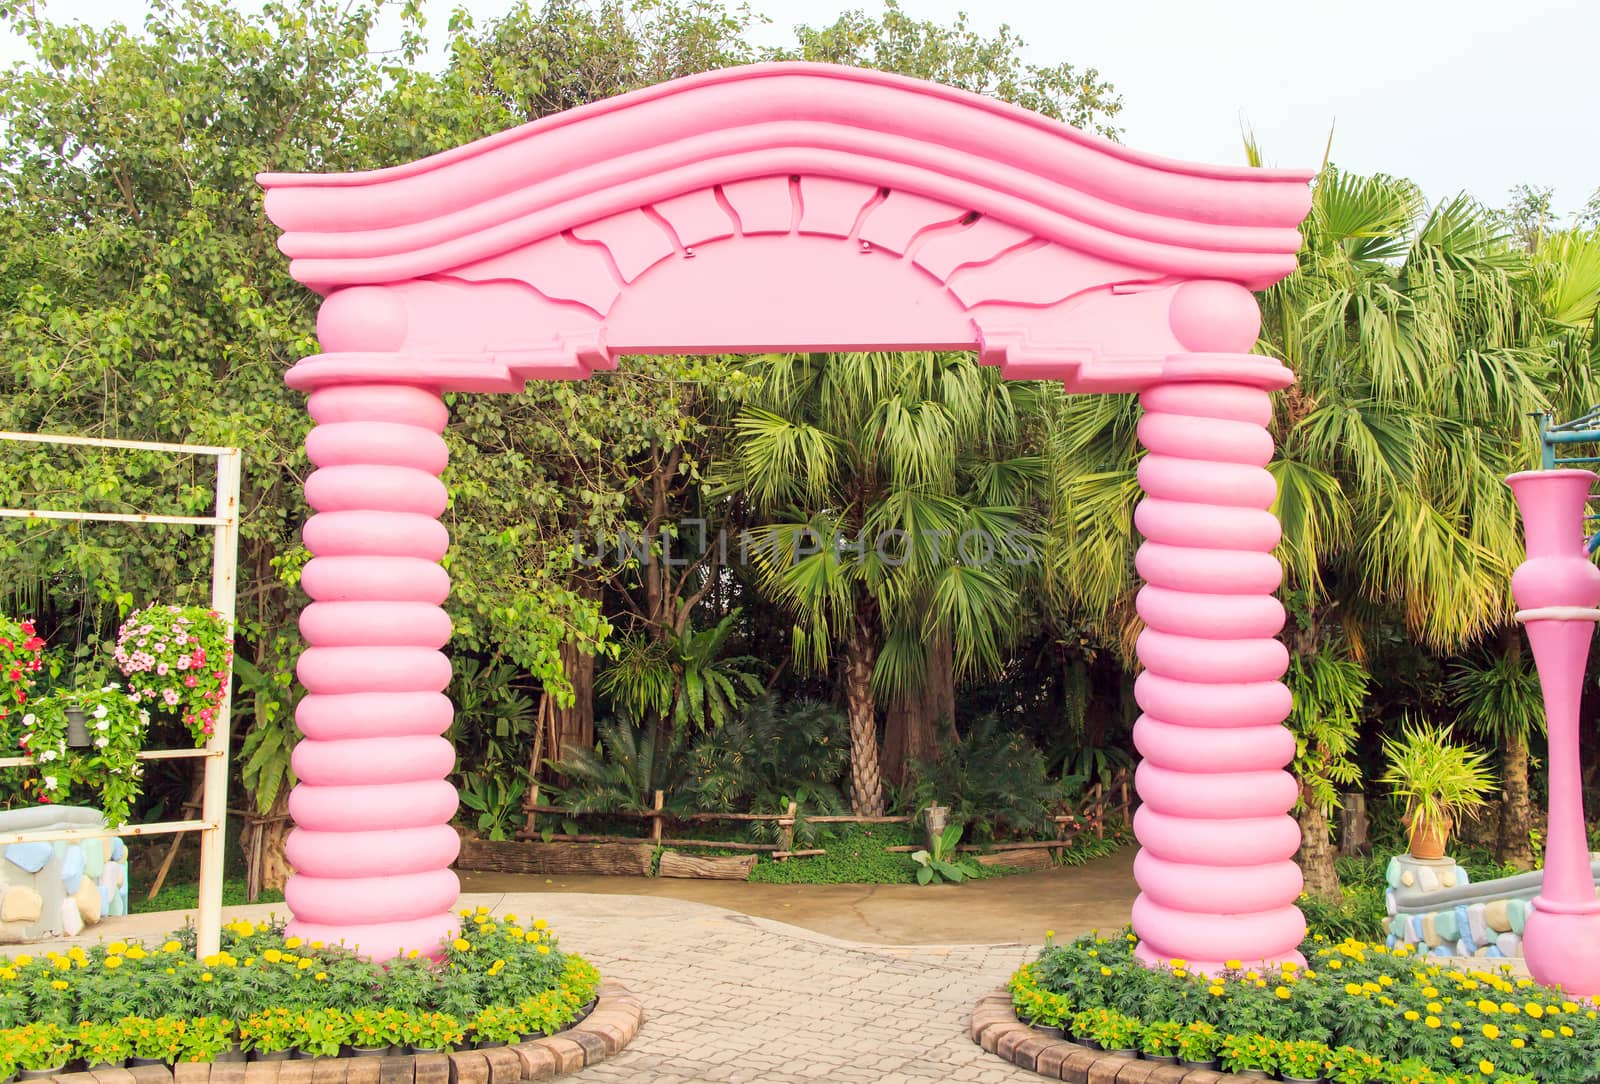 Arch molding decorates on the flower garden.